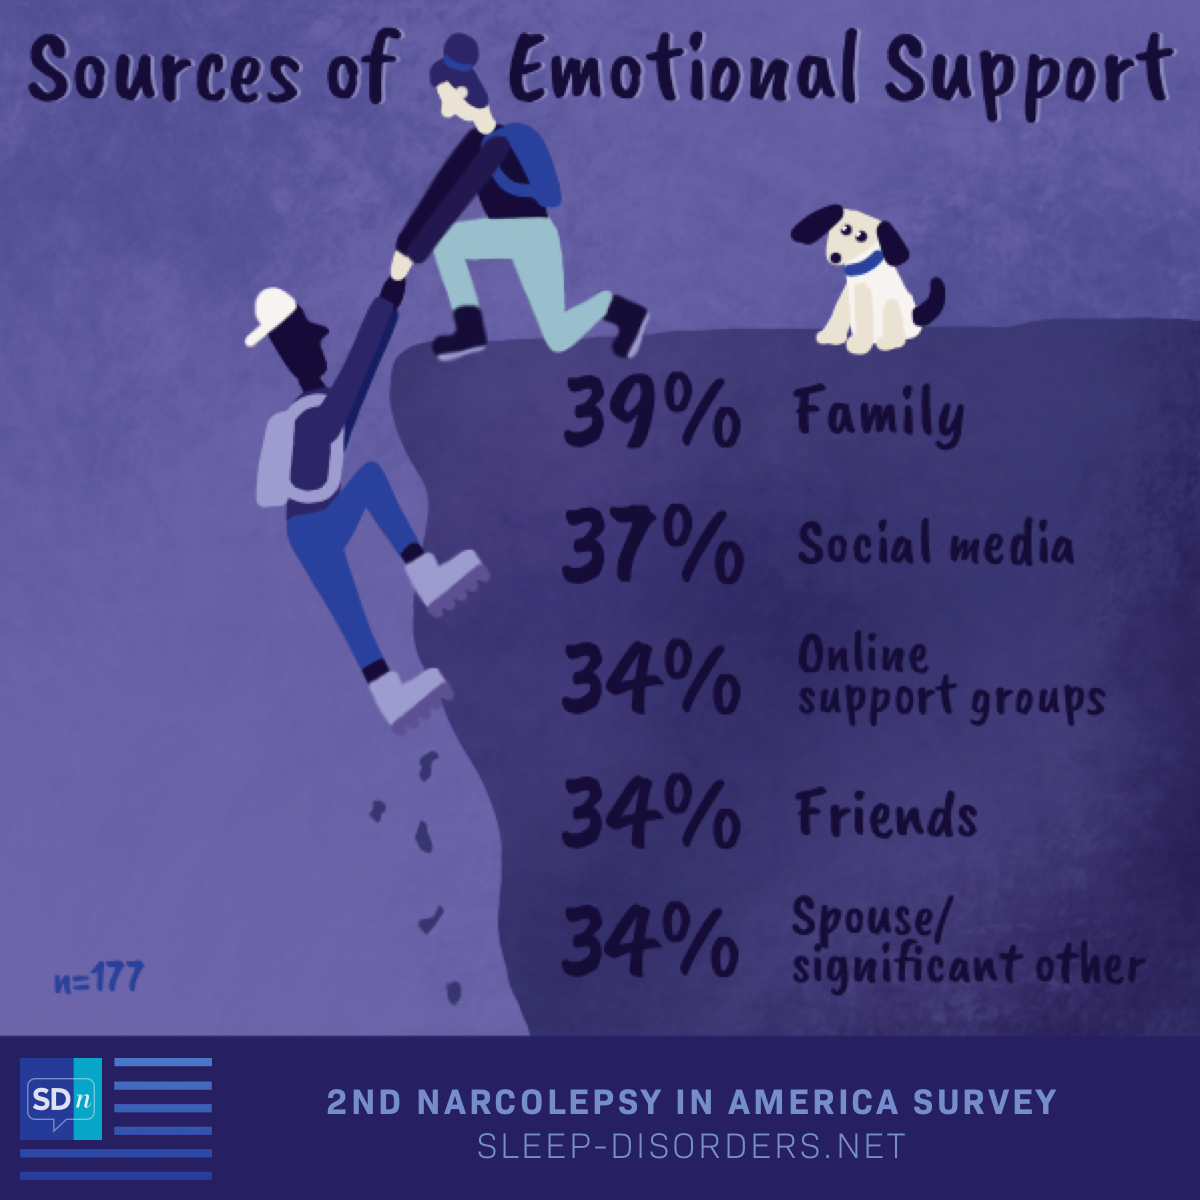 According to the 2nd Sleep Disorders In America survey, emotional support comes from family (39%), social media (37%), online support groups (34%), friends (34%), and spouse/significant other (34%).